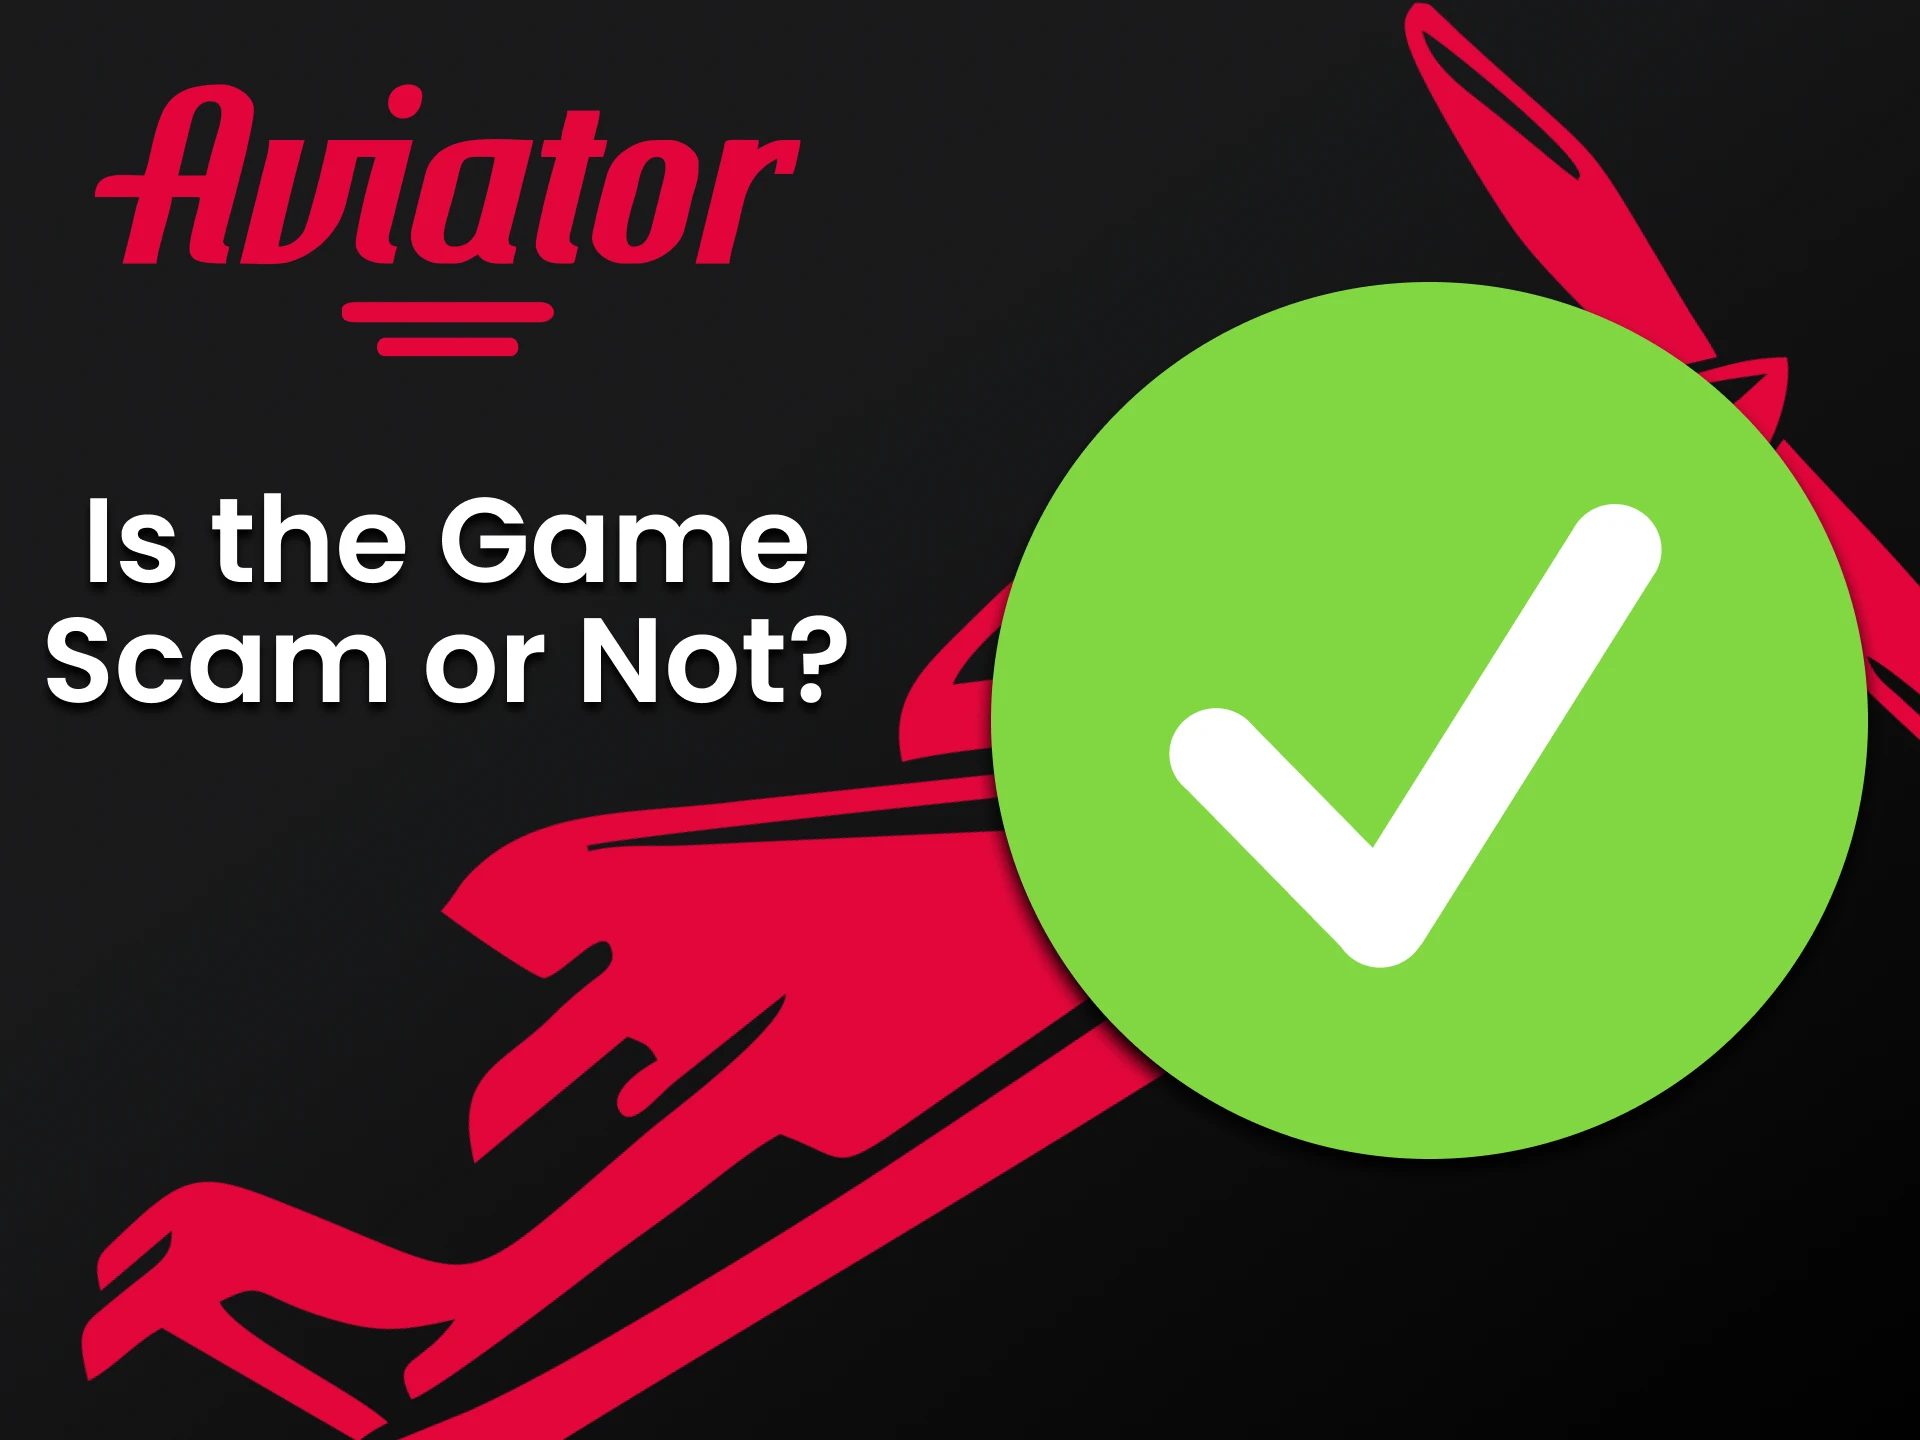 There is no cheating in the Aviator game.